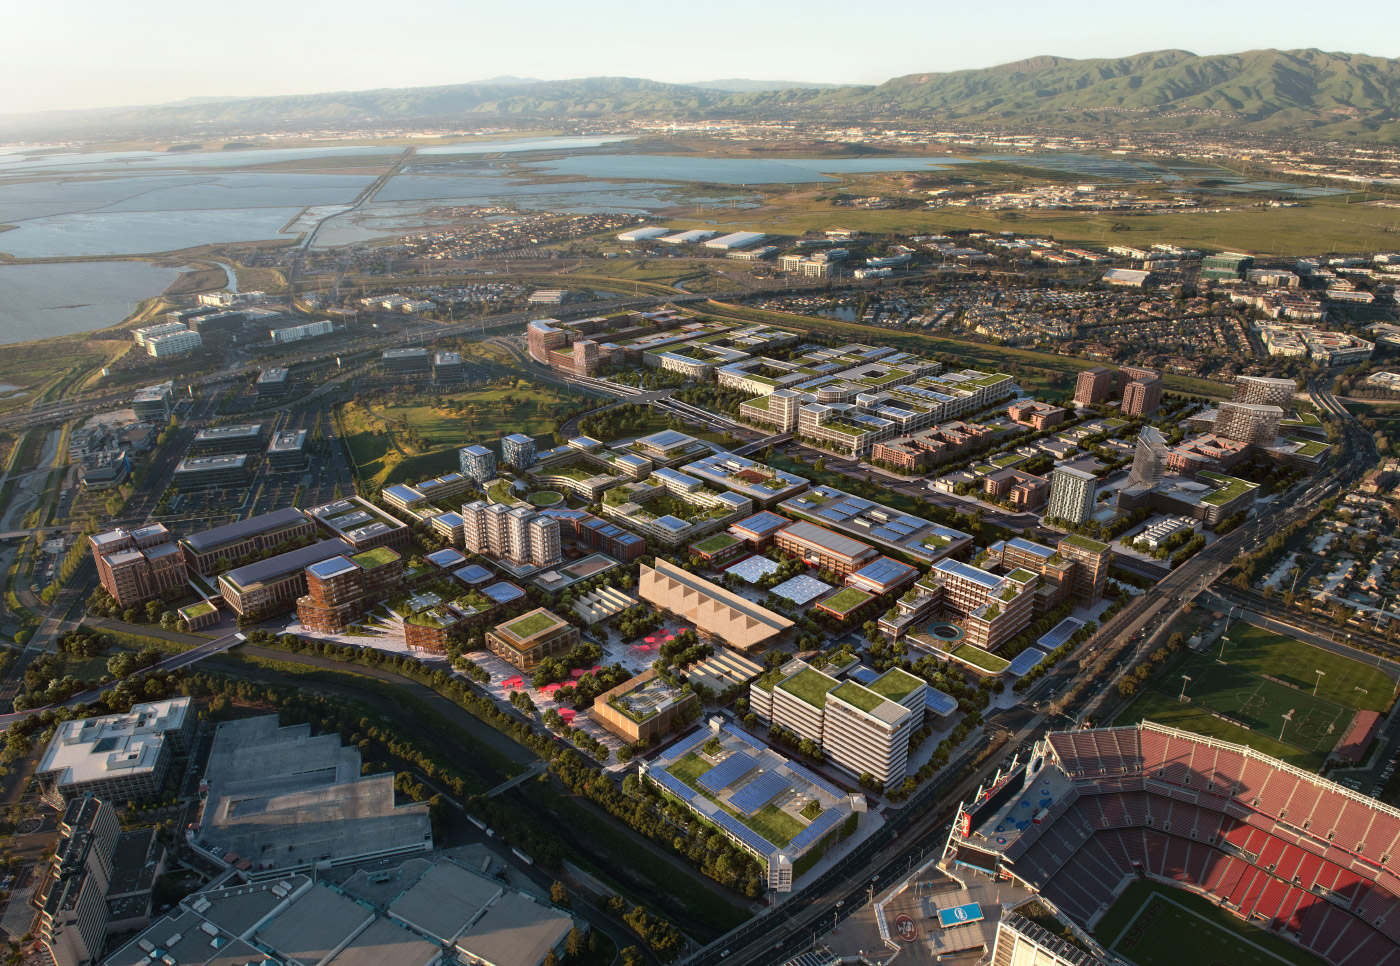 related-taps-foster-partners-for-new-neighborhood-in-silicon-valley